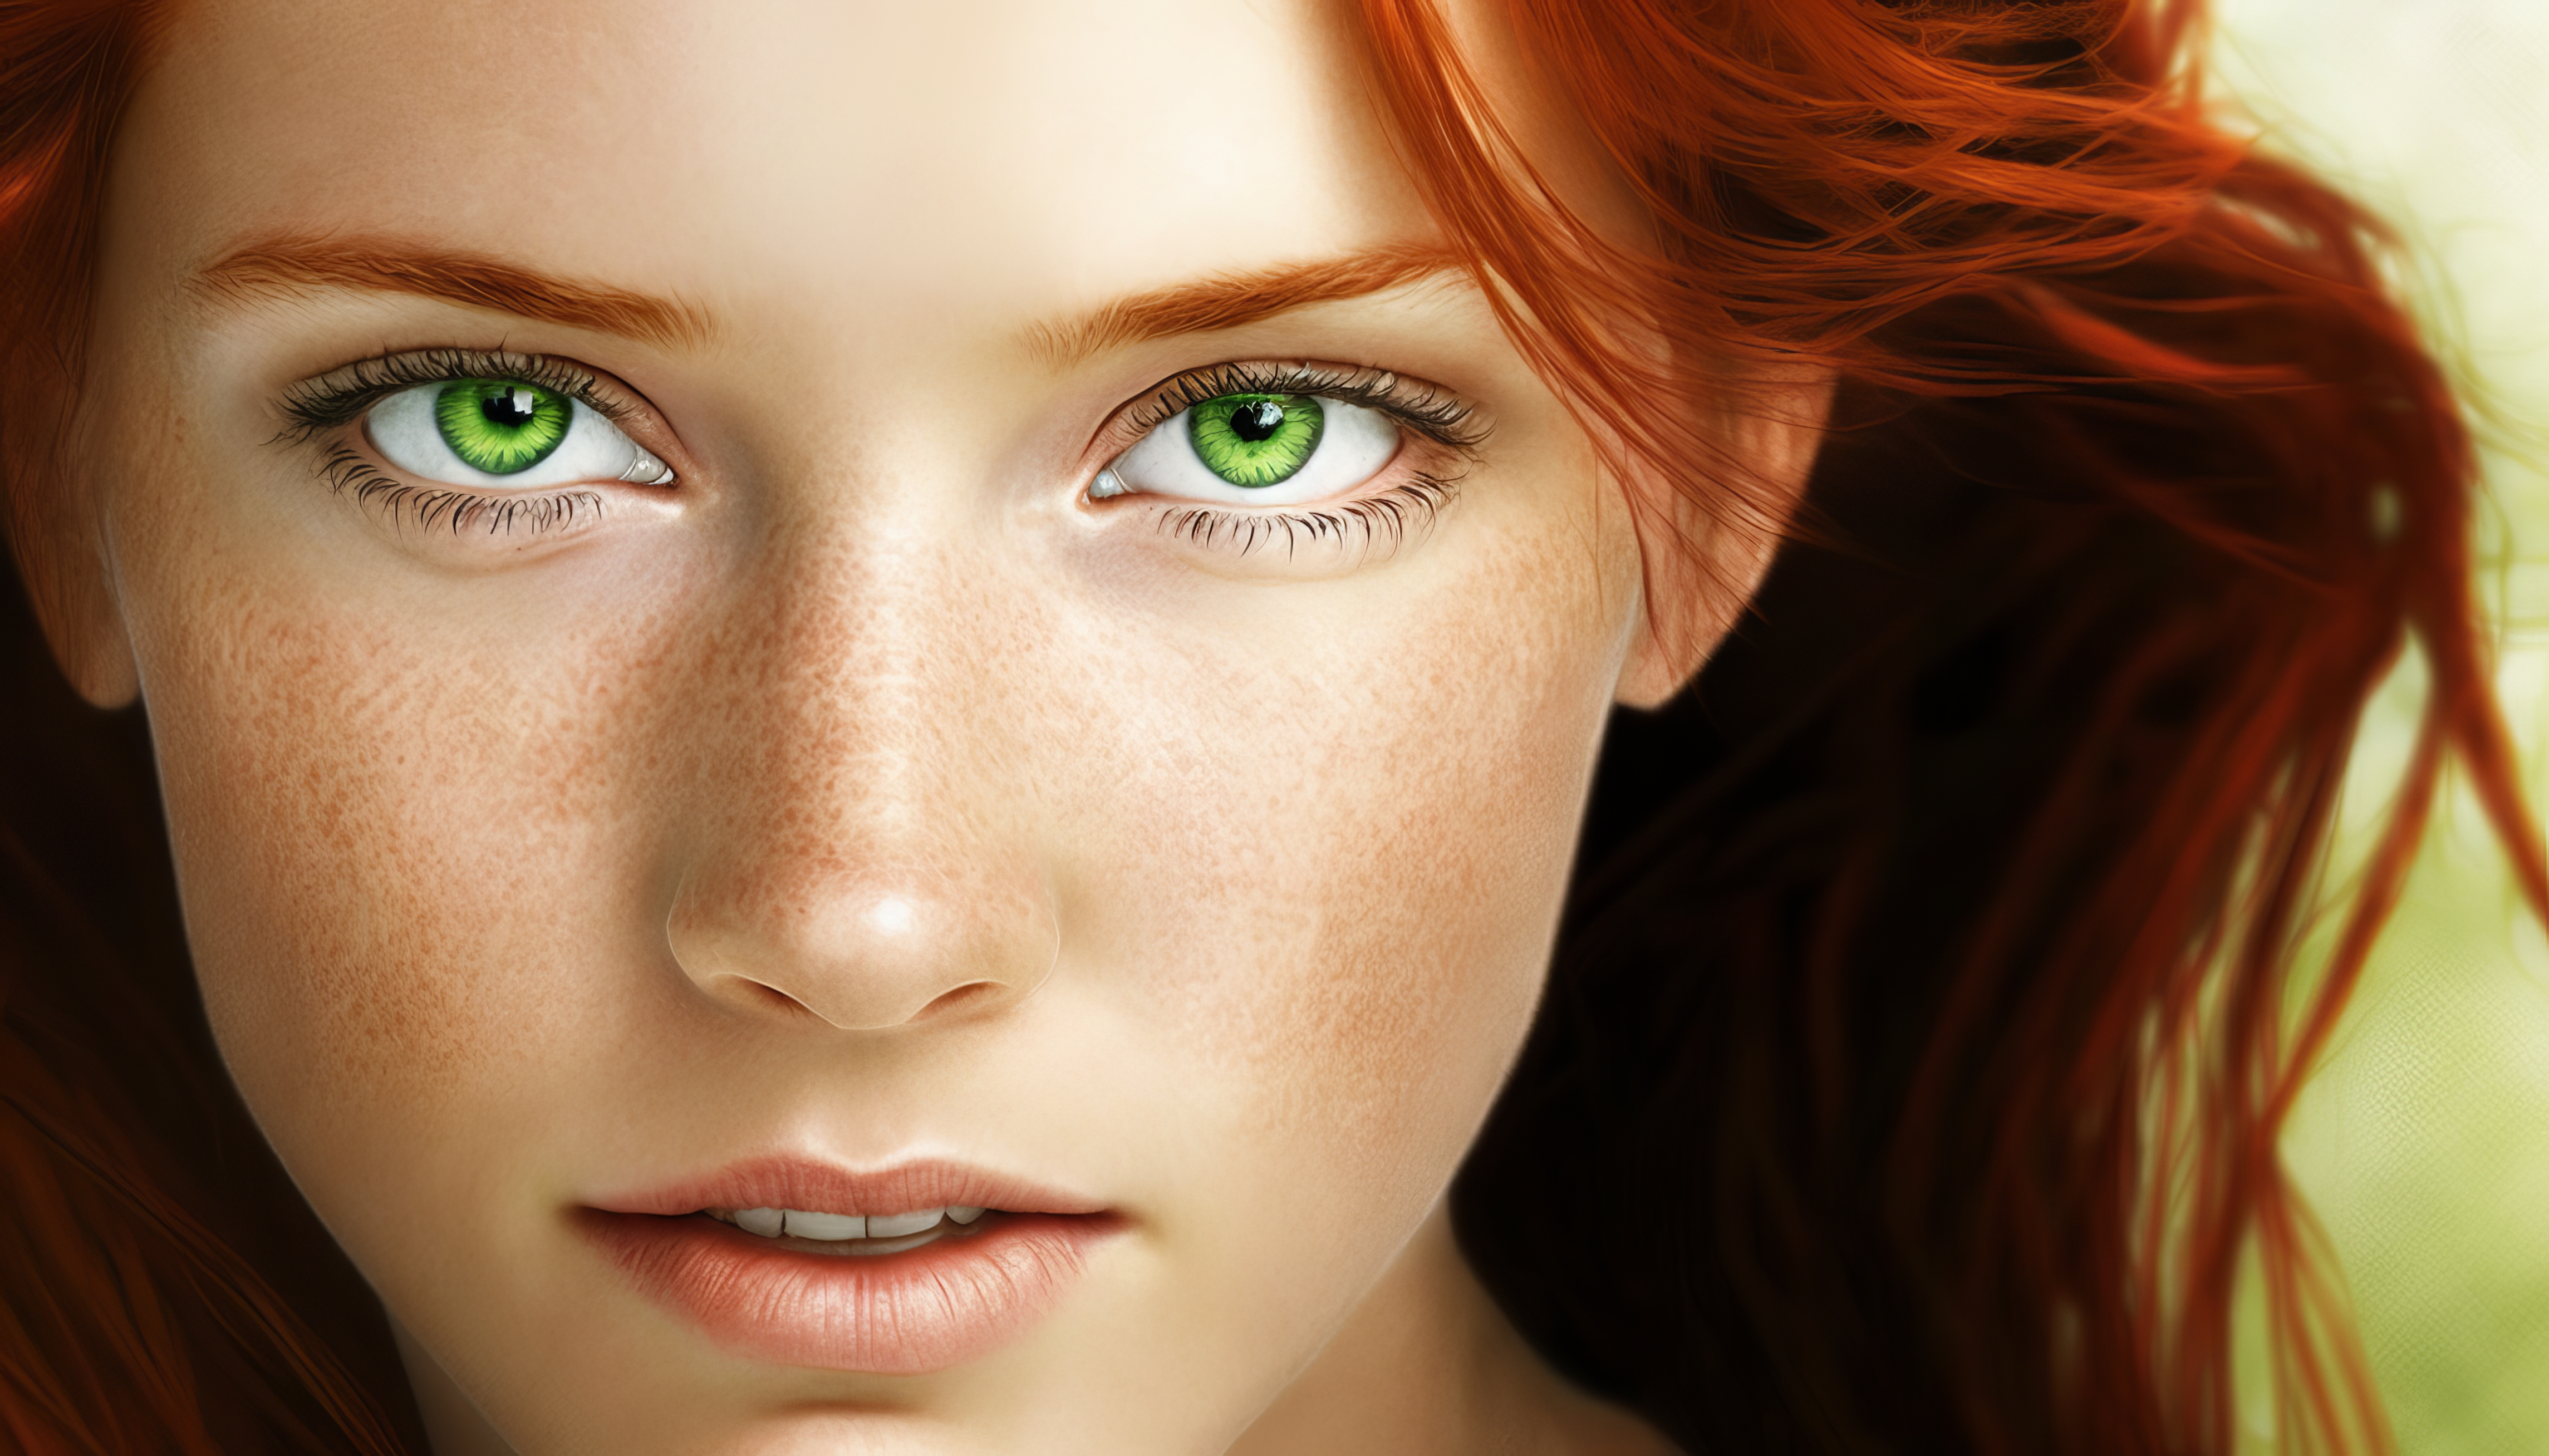 adan mora recommends redhead woman with green eyes pic